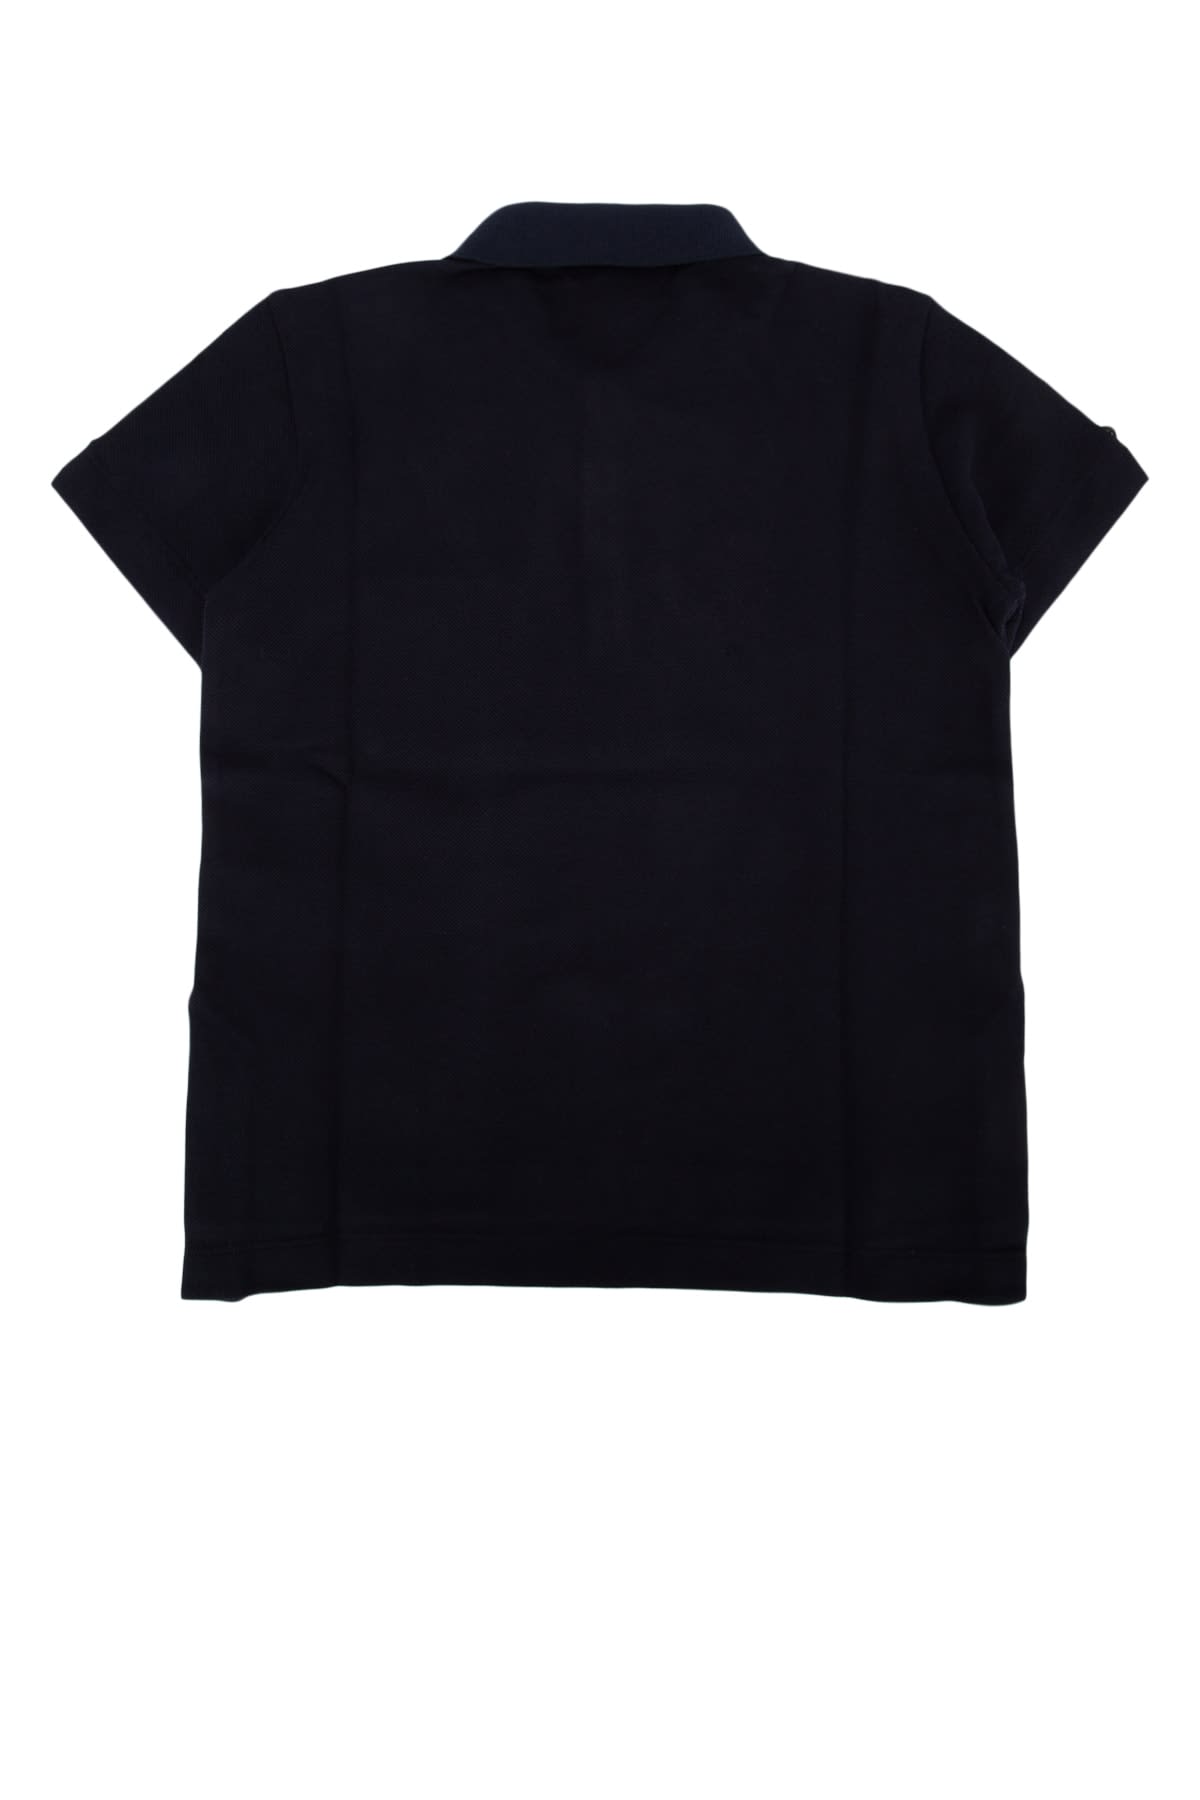 Thom Browne Kids' Polo In Navy